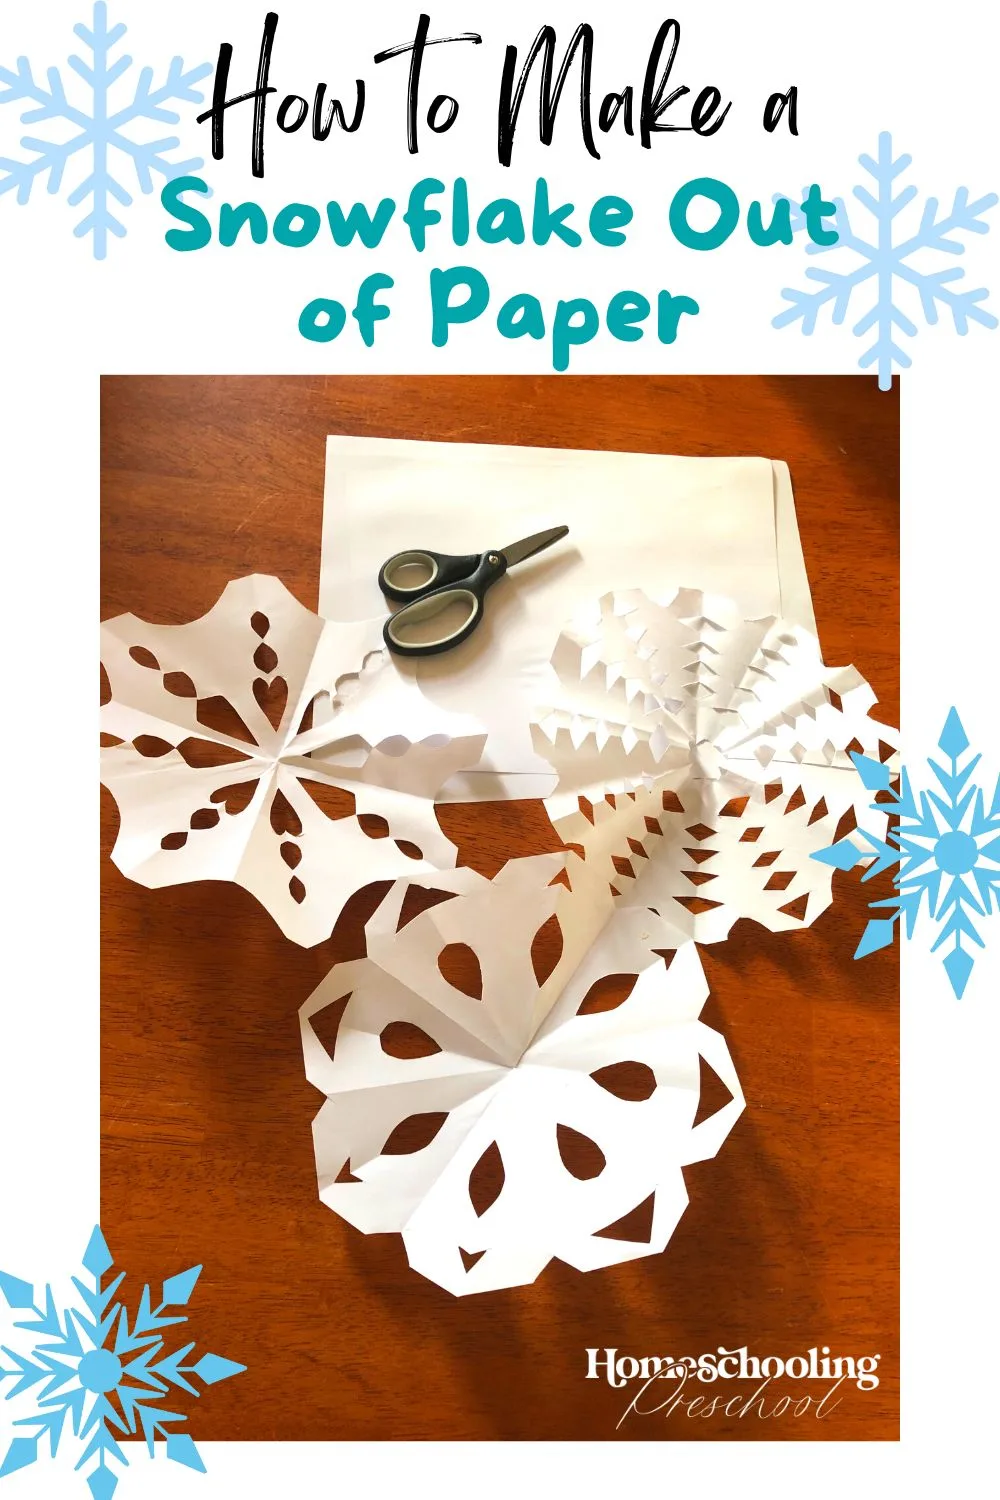 How to Make a Snowflake Out of Paper